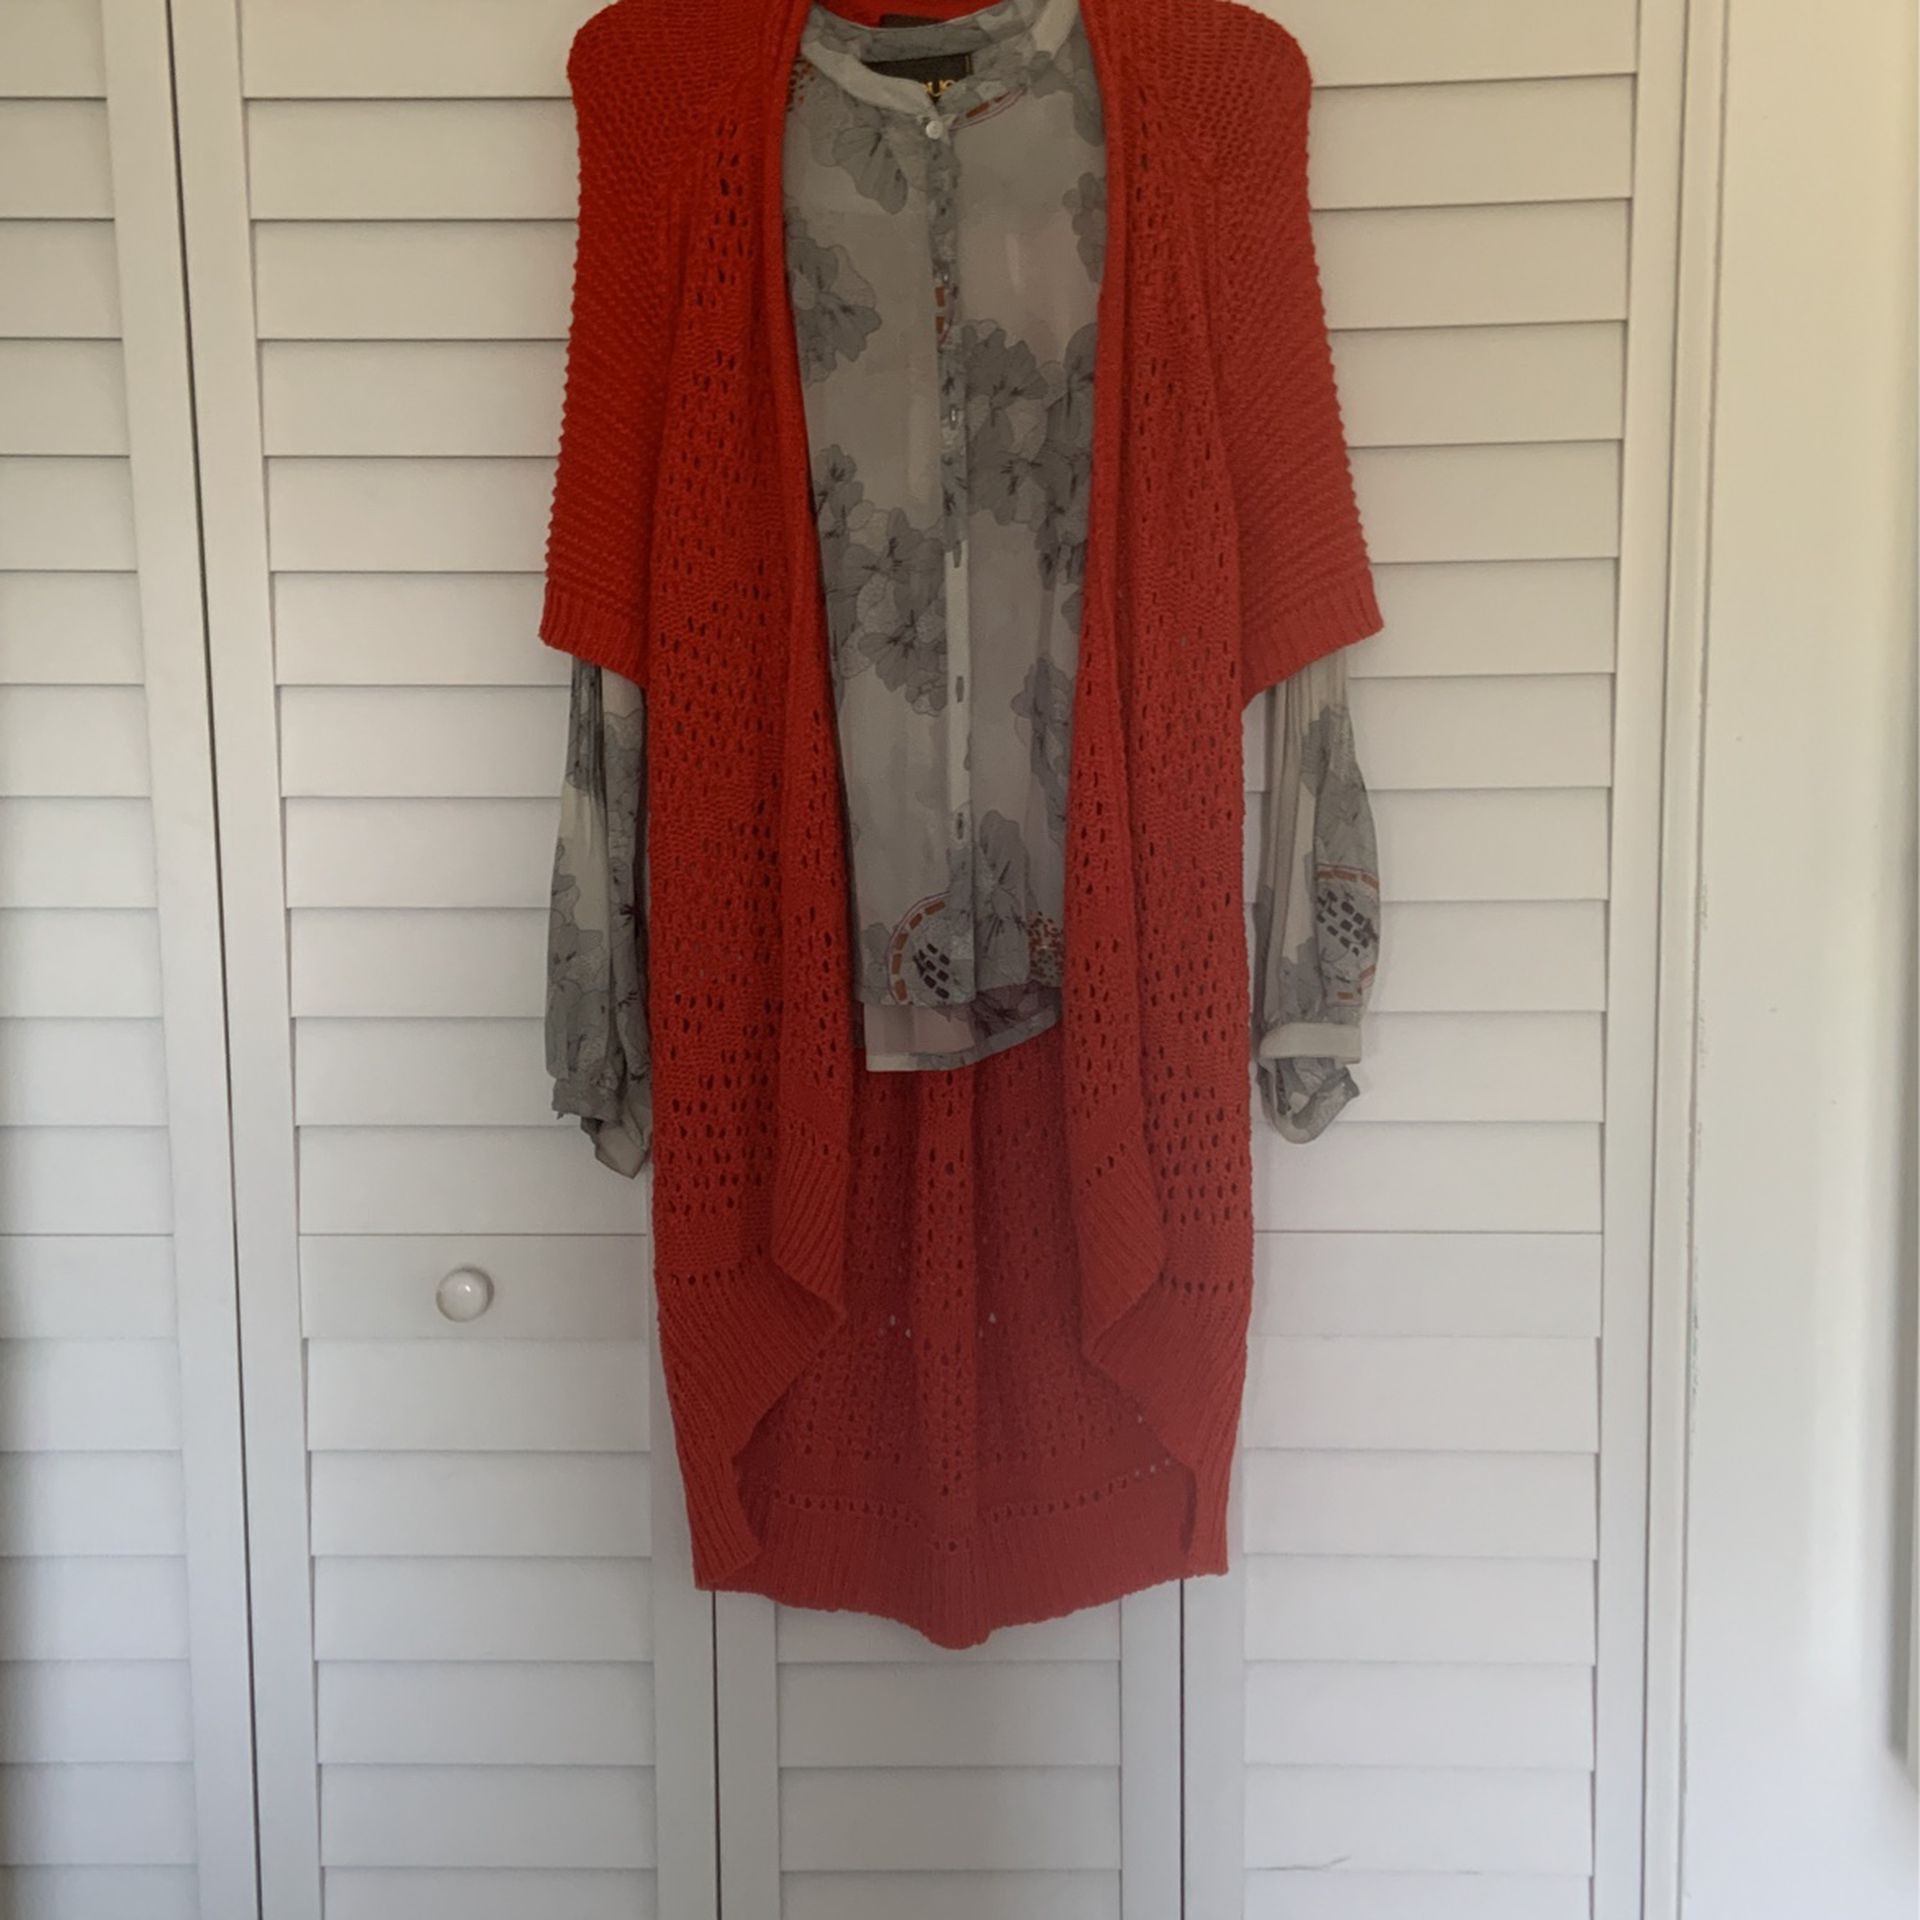 New Anthropologie Sweater Cardigan And Silk Long Sleeve Shirt Orange And Grey Set For $95 Or Buy Separately 